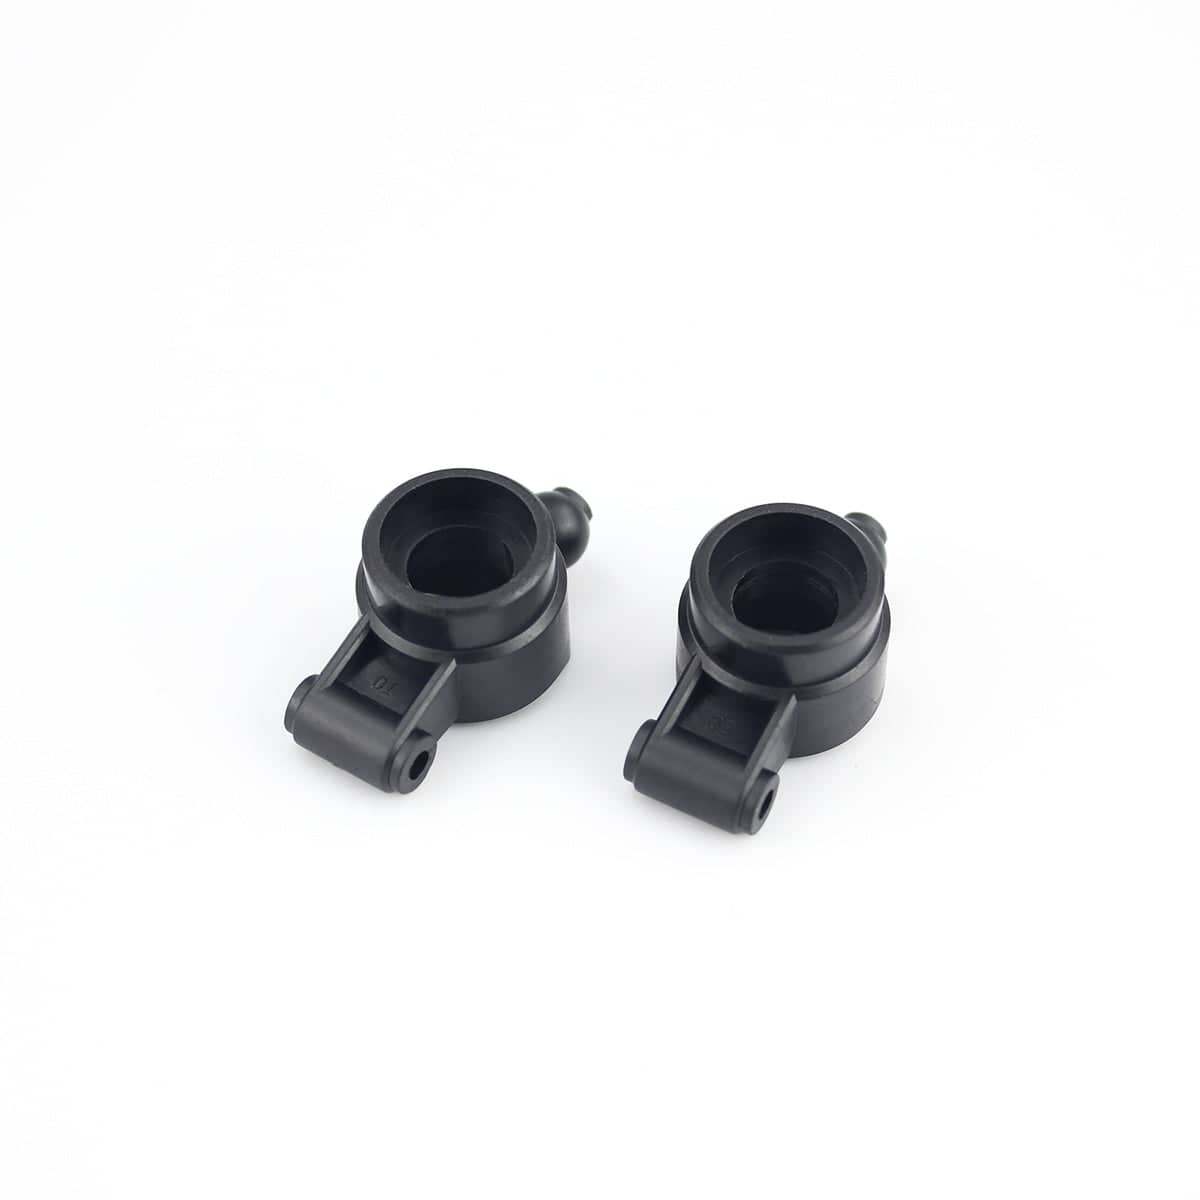 Hosim RC Car Rear Left and Right Cup Parts 71-035 for for G171 G172 G173 G174